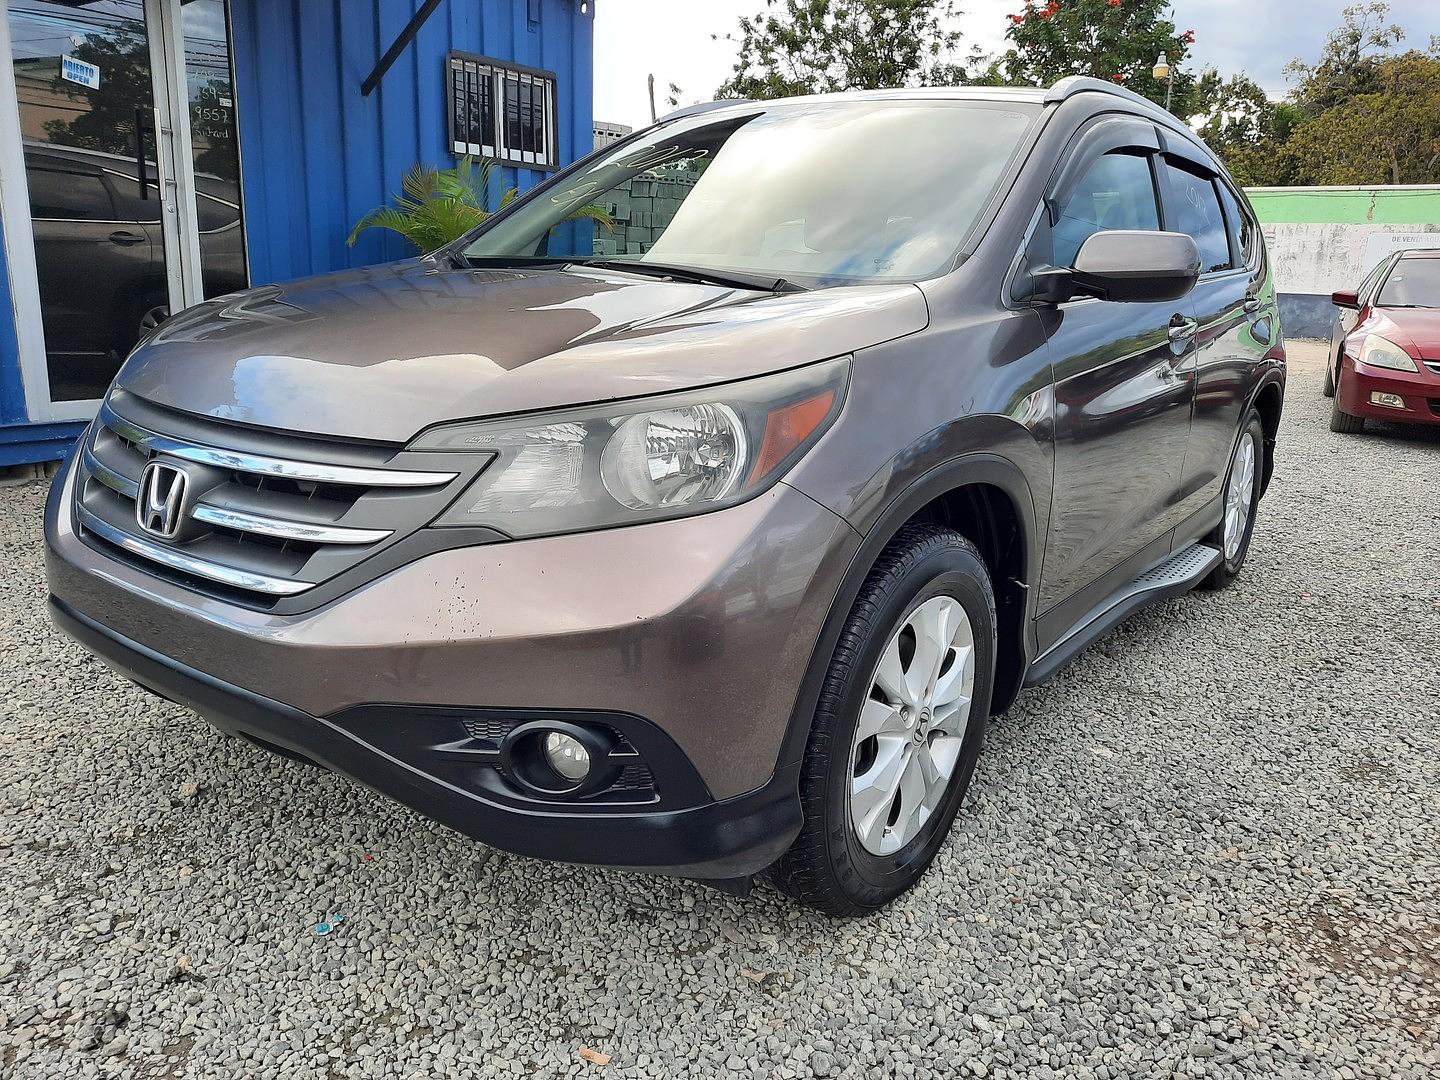 62 Great 2012 crv exterior colors Info